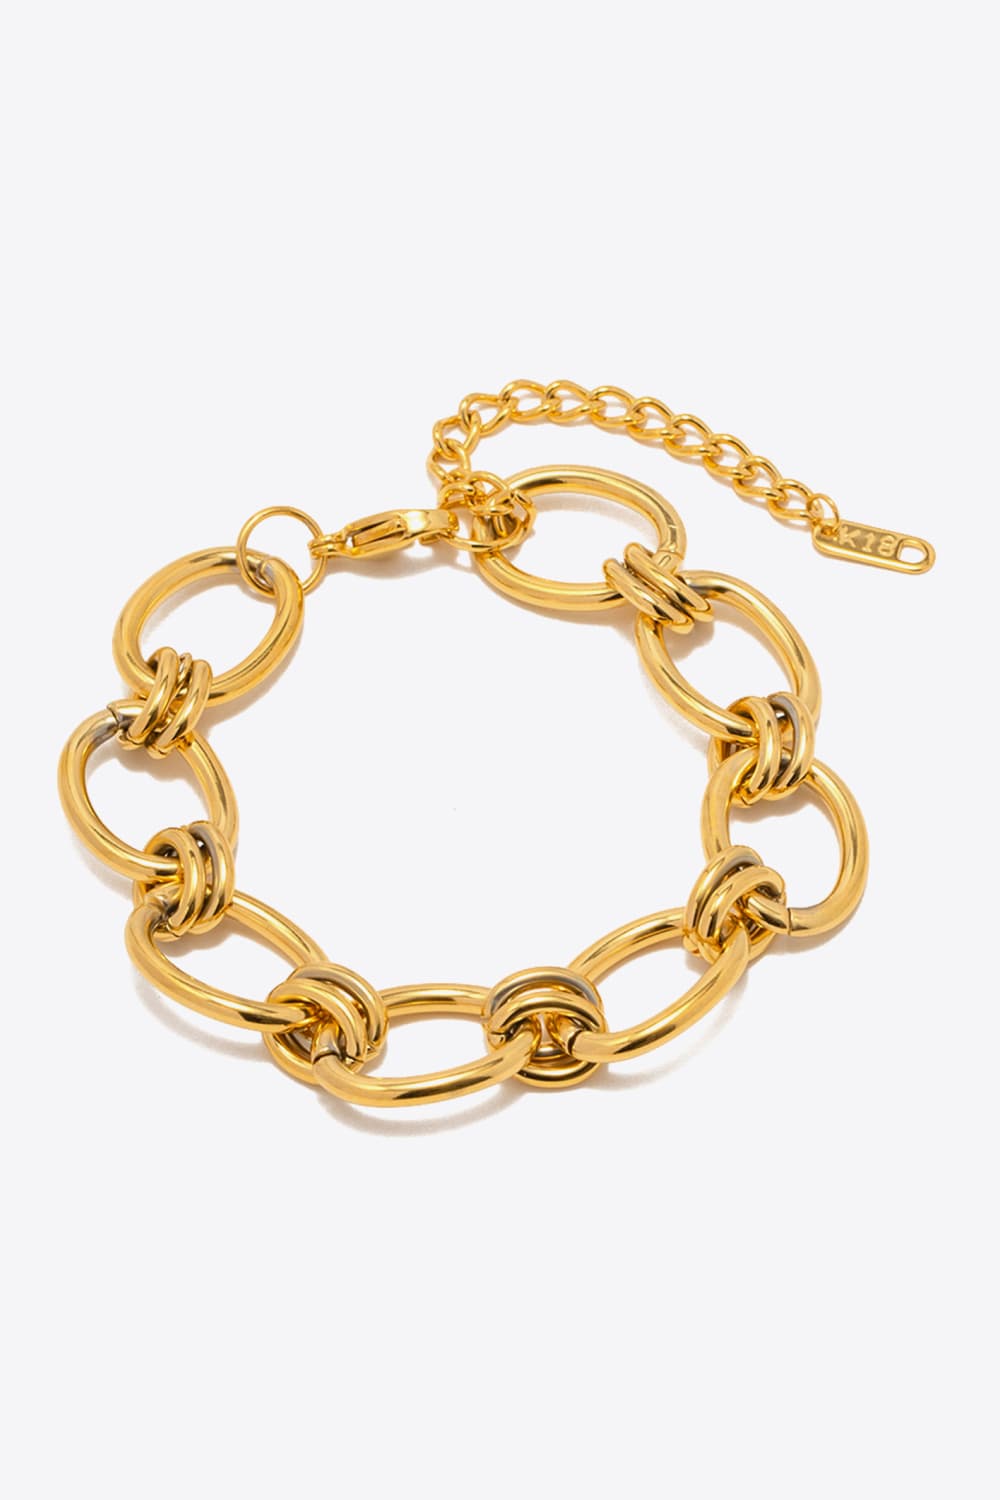 Chunky Chain Stainless Steel Bracelet - Gold / One Size - T-Shirts - Bracelets - 2 - 2024